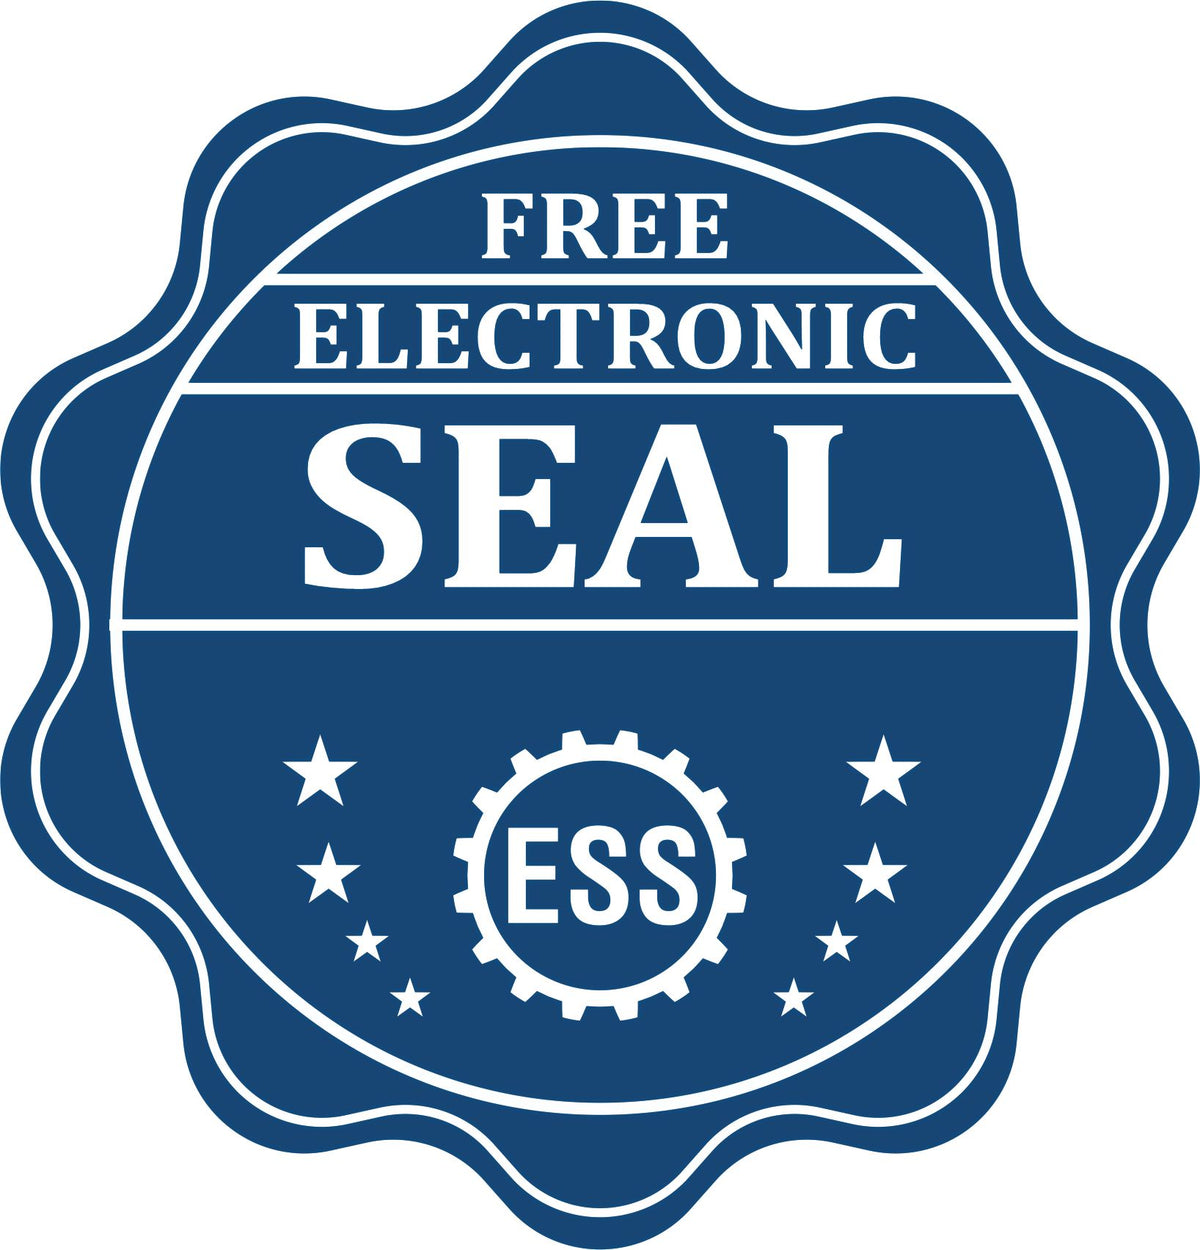 A badge showing a free electronic seal for the Slim Pre-Inked Iowa Professional Geologist Seal Stamp with stars and the ESS gear on the emblem.